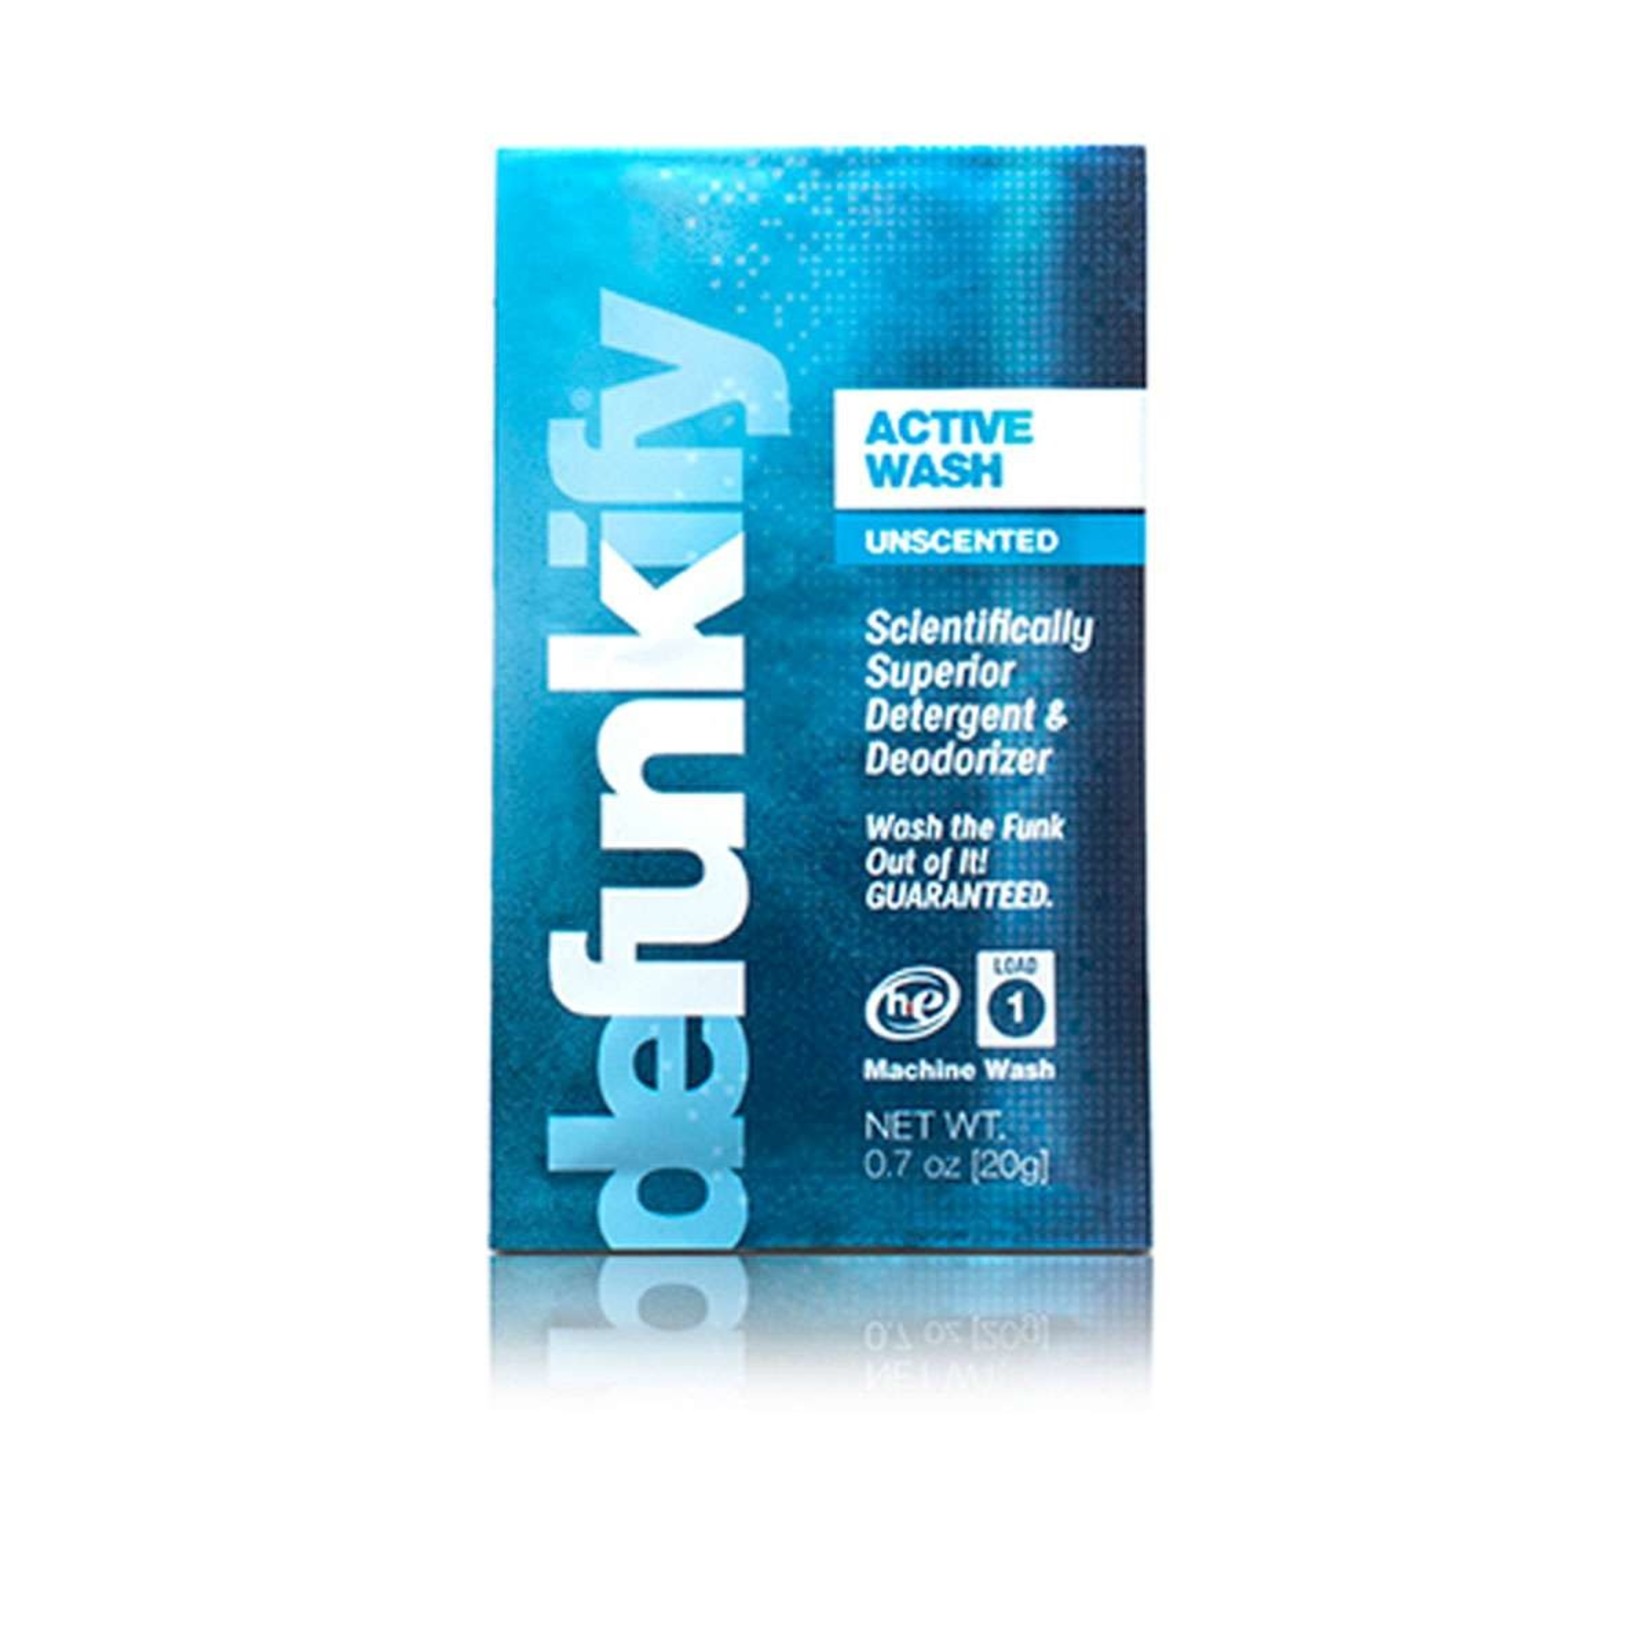 Defunkify Defunkify Active Wash Laundry Detergent Powder Trial Size